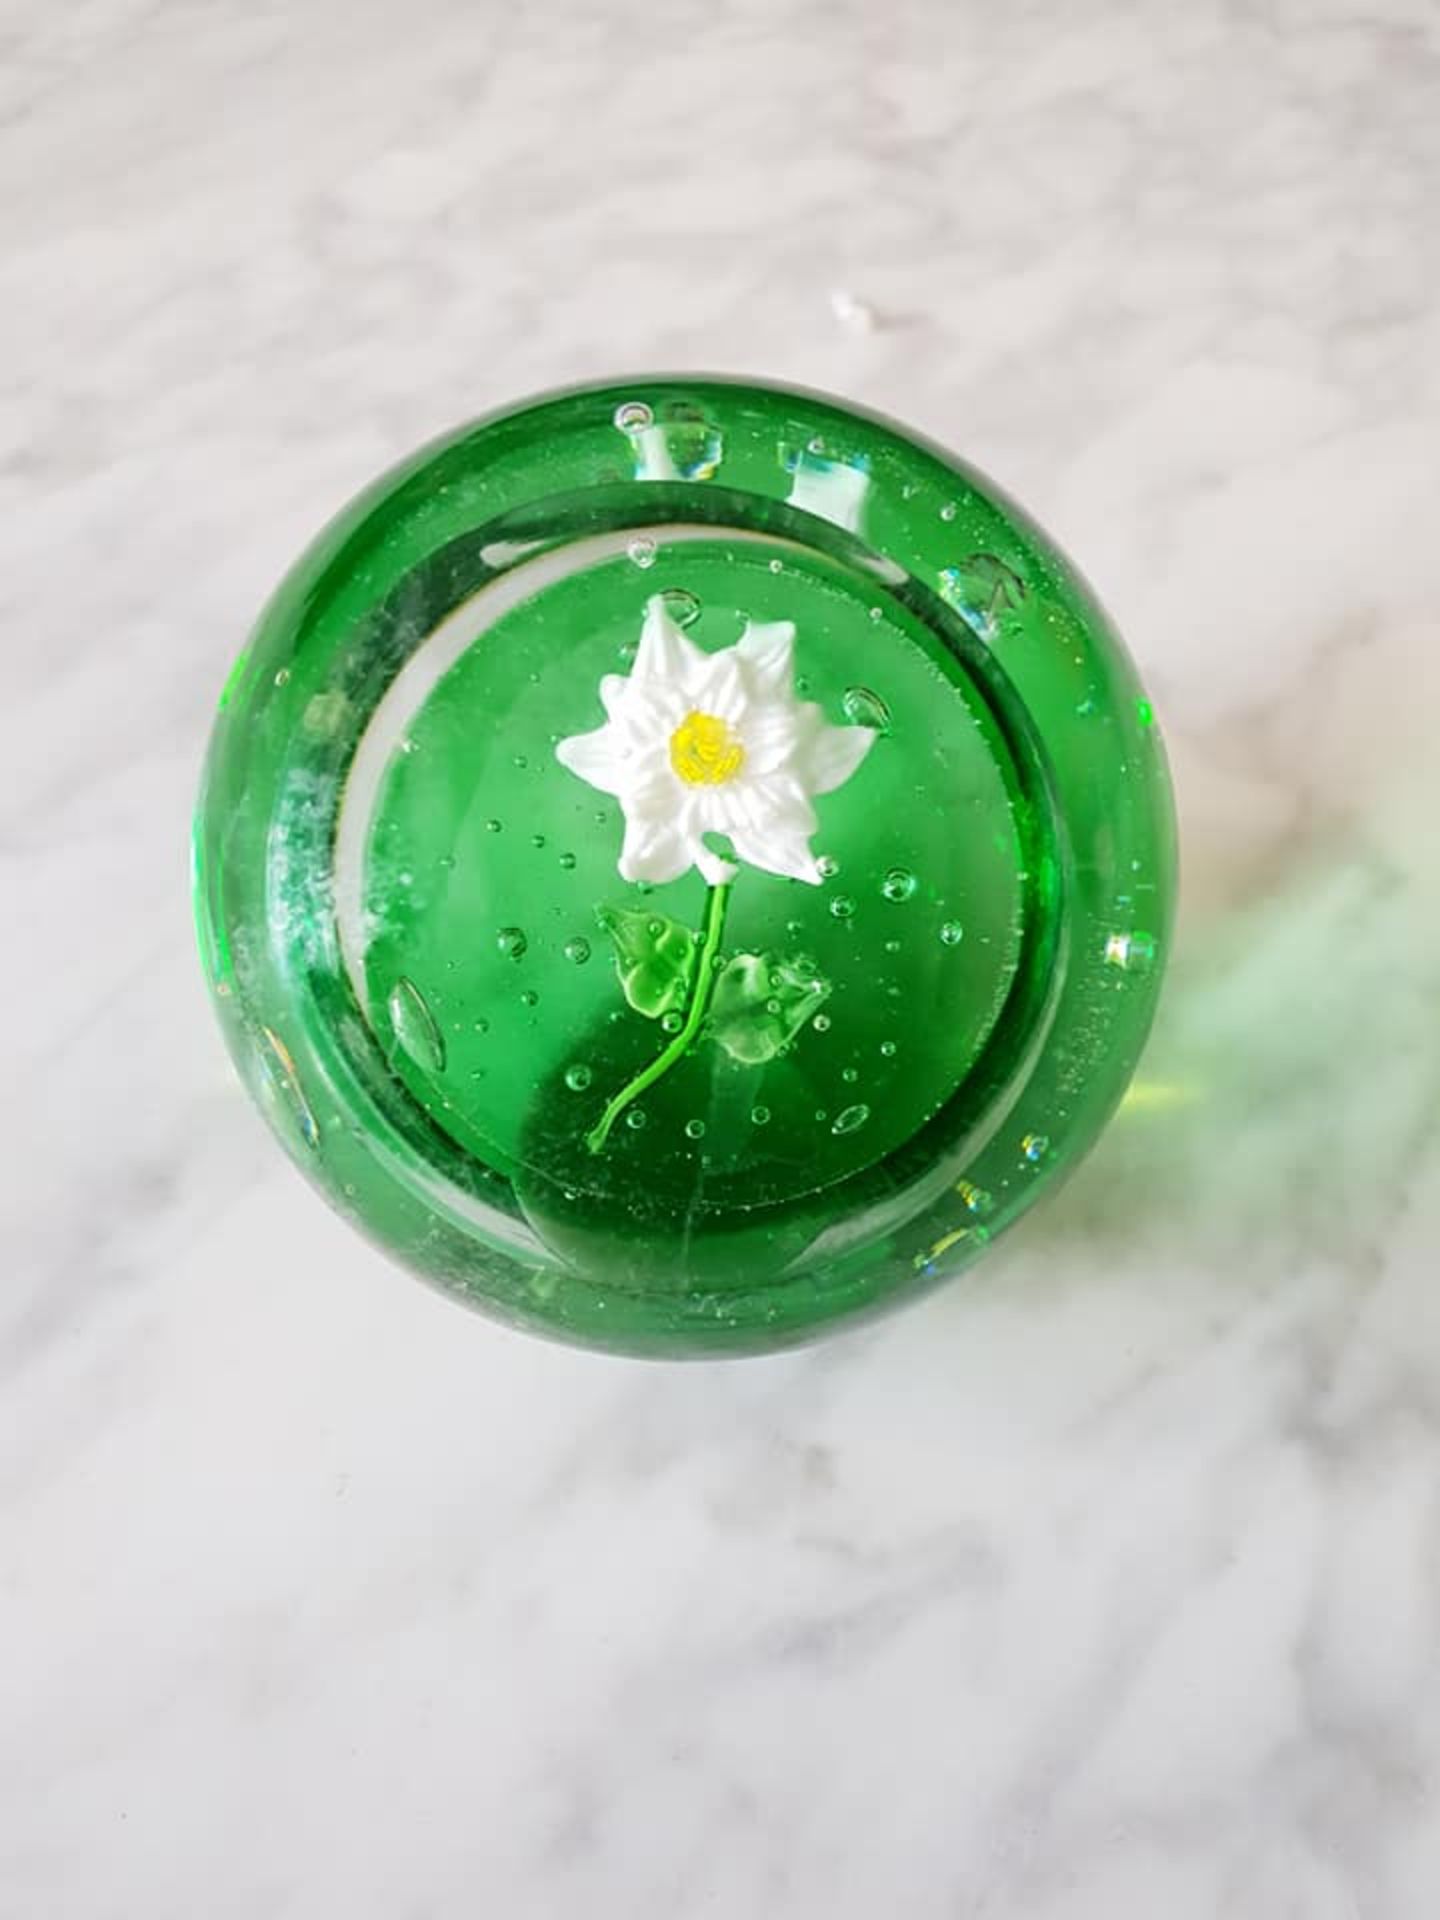 Bohemian blown art glass sphere paperweight 8cm light green with white flower yellow middle and